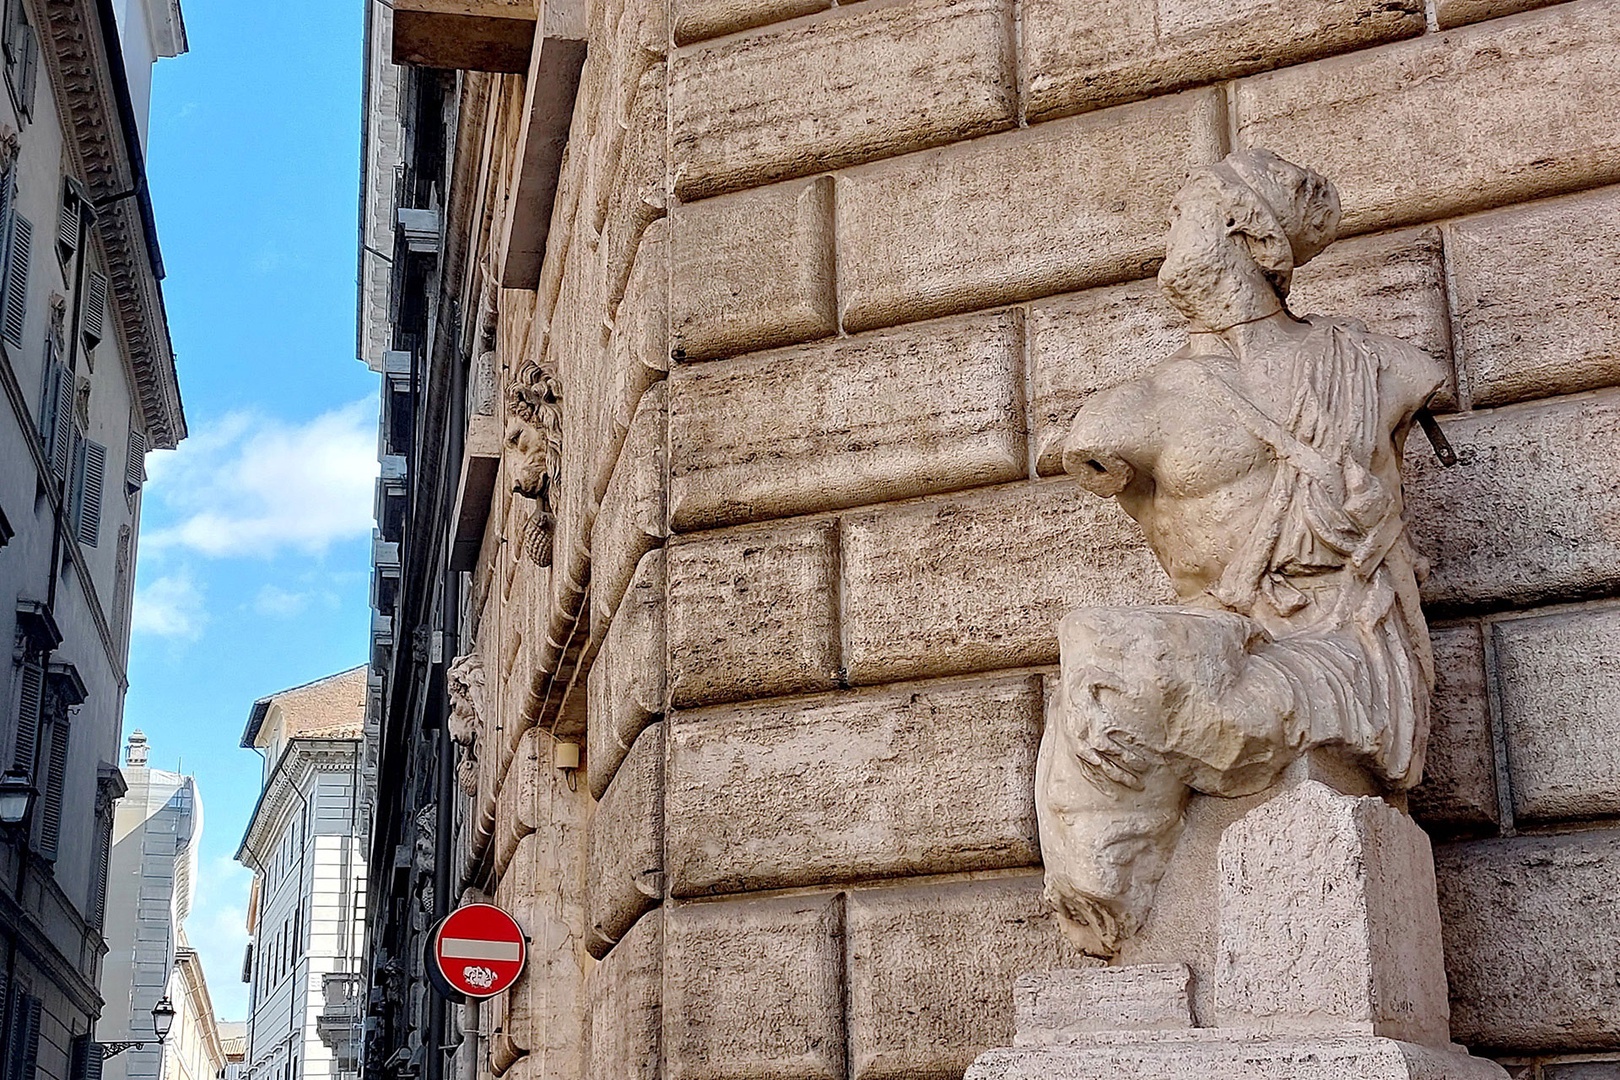 The Pasquino, one of Rome's famous 'talking statues'